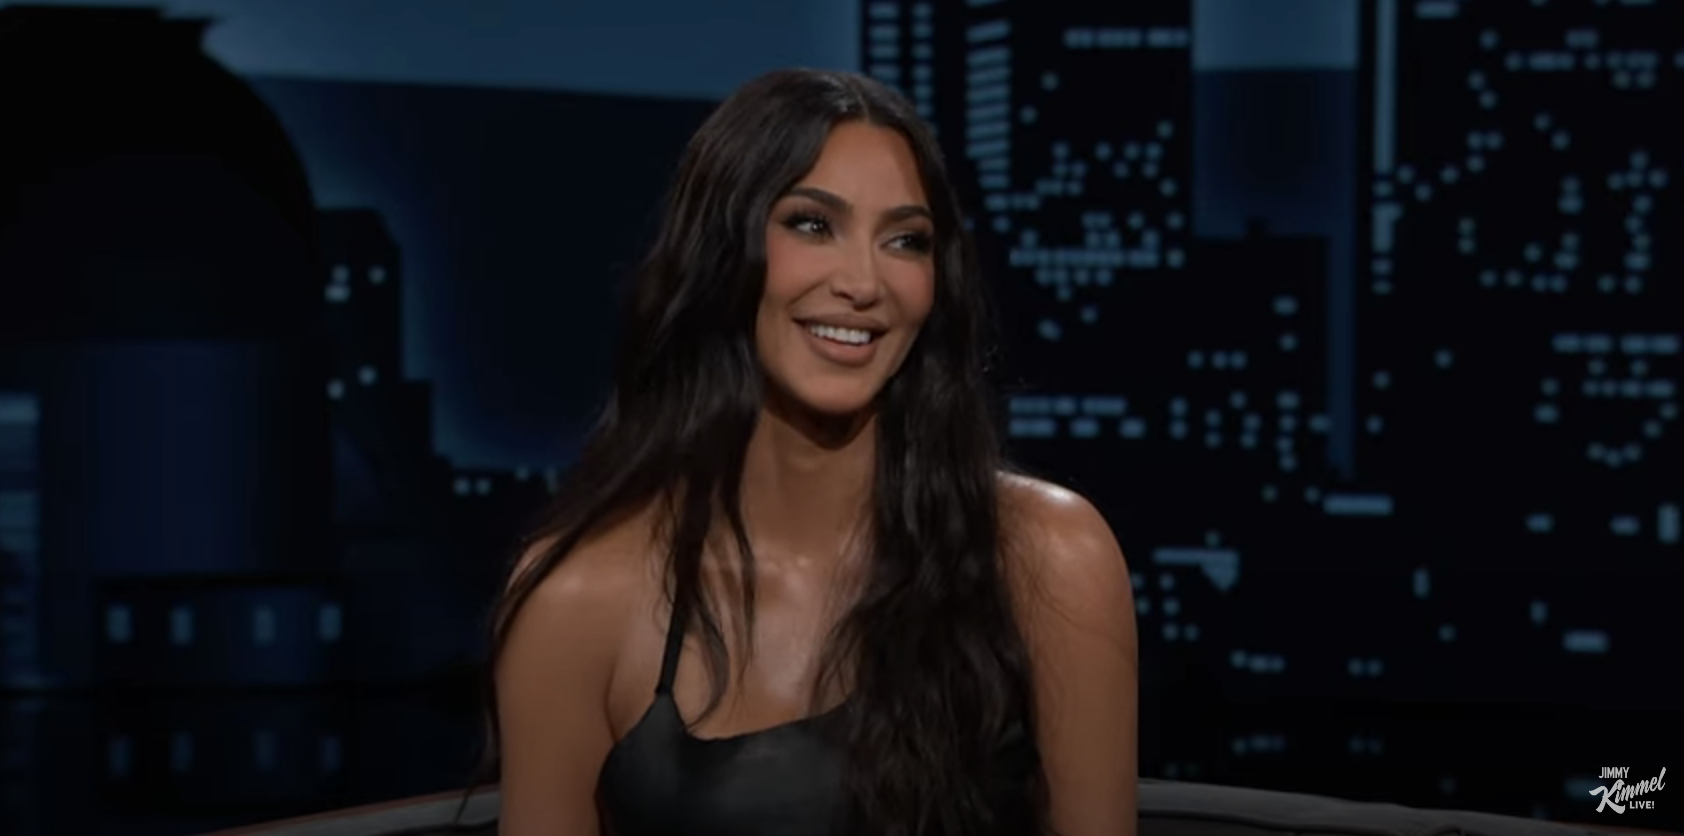 Person in a black top smiling on a talk show set